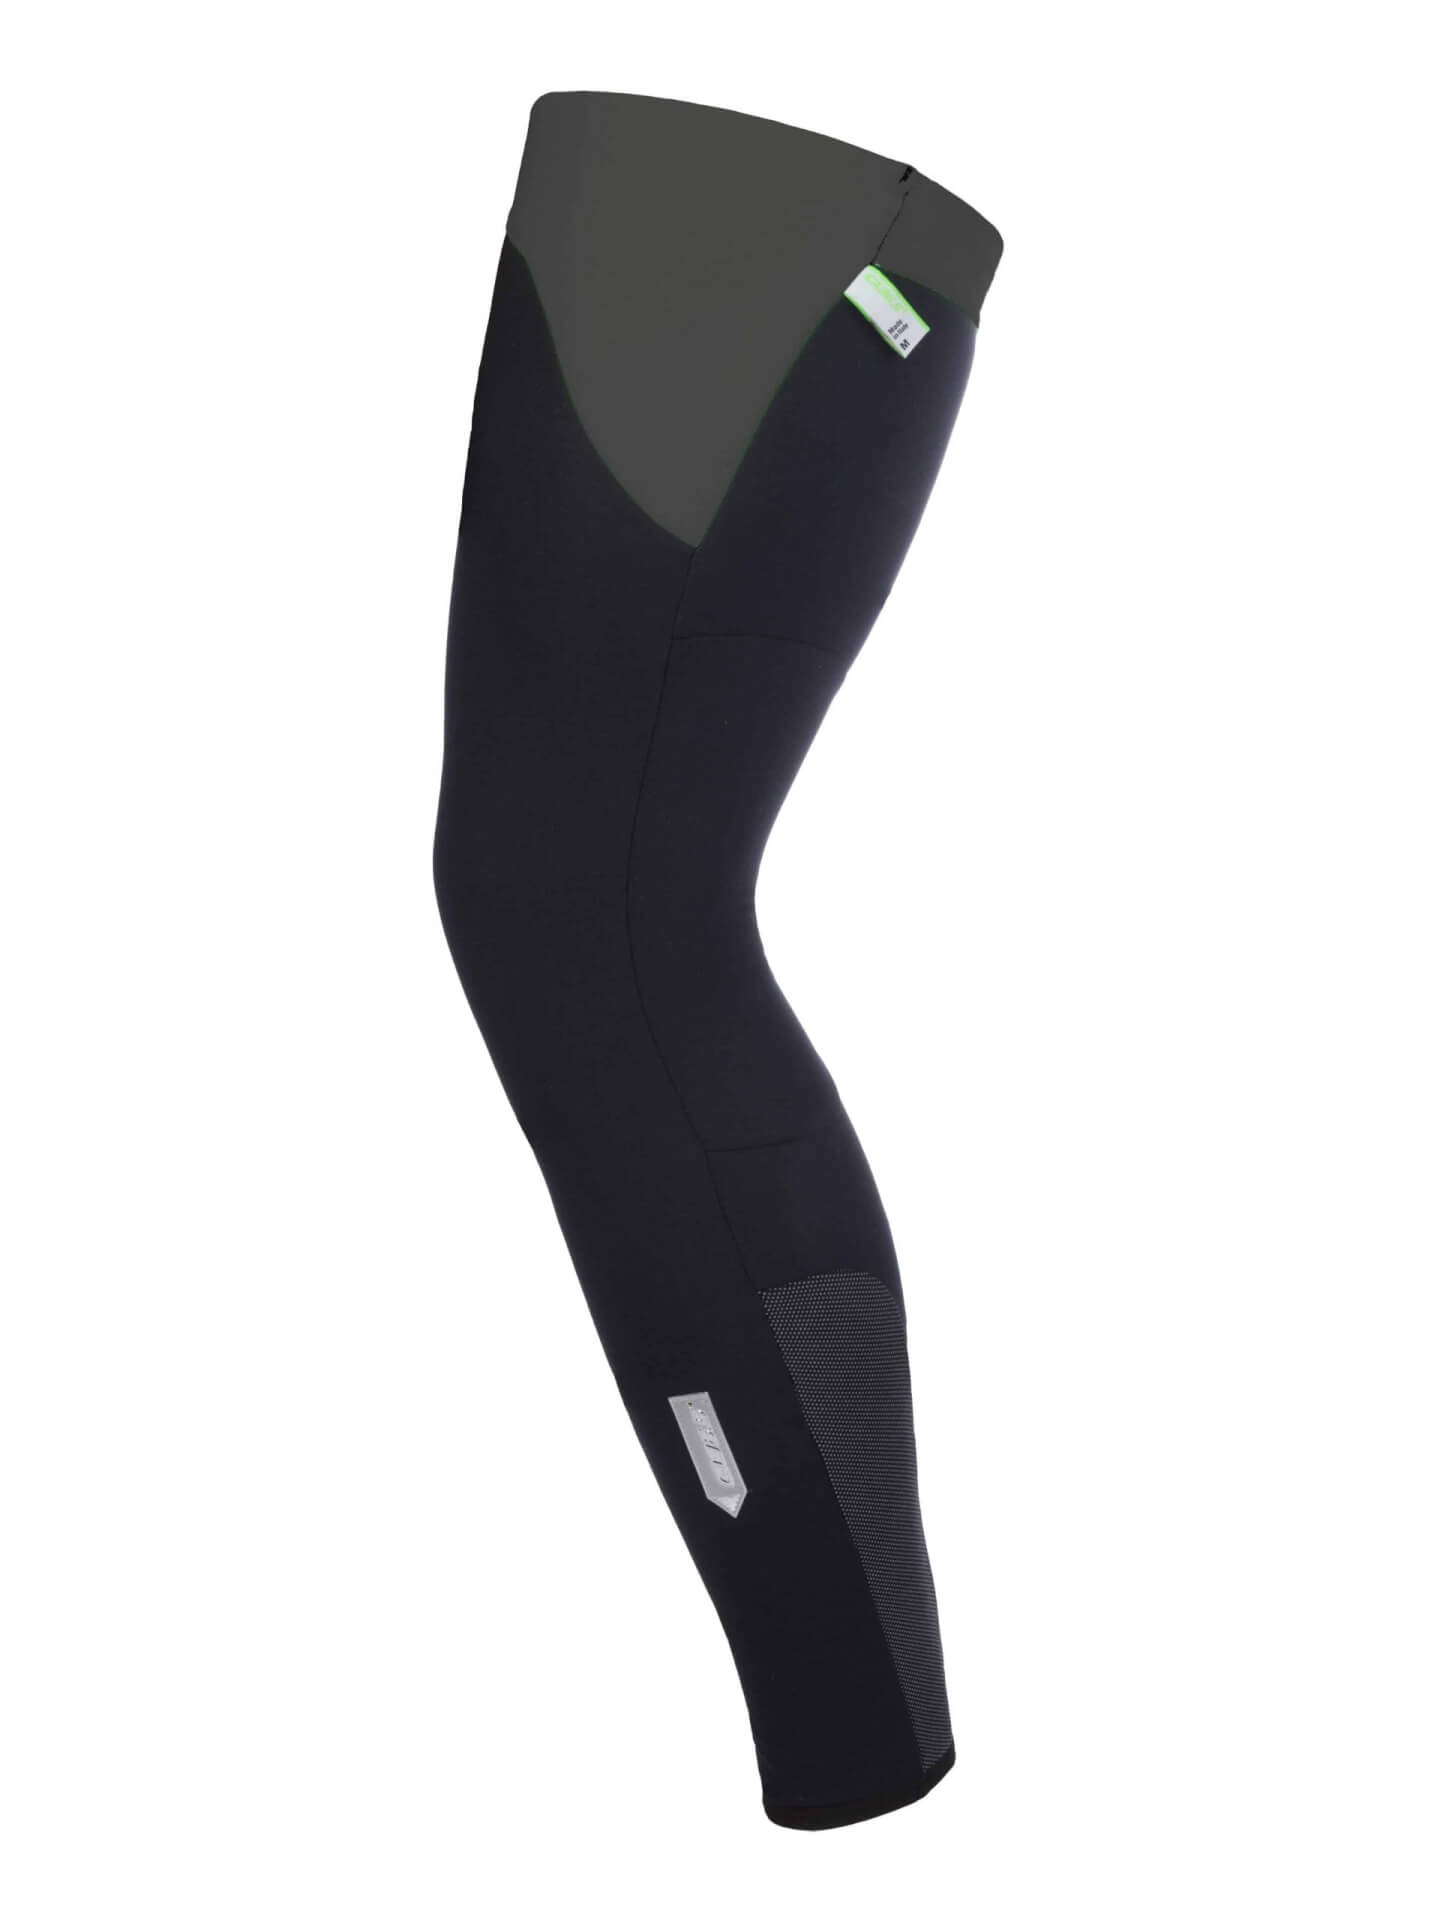 Wheel Wizard (Malta) - STAY WARM WITH COMFORT ENDURA THERMO LEG WARMERS €  29.99 Thermolite® with High Performance Repel TEFLON® fabric protector for  ultimate weather comfort with durable water repellency / Silicone